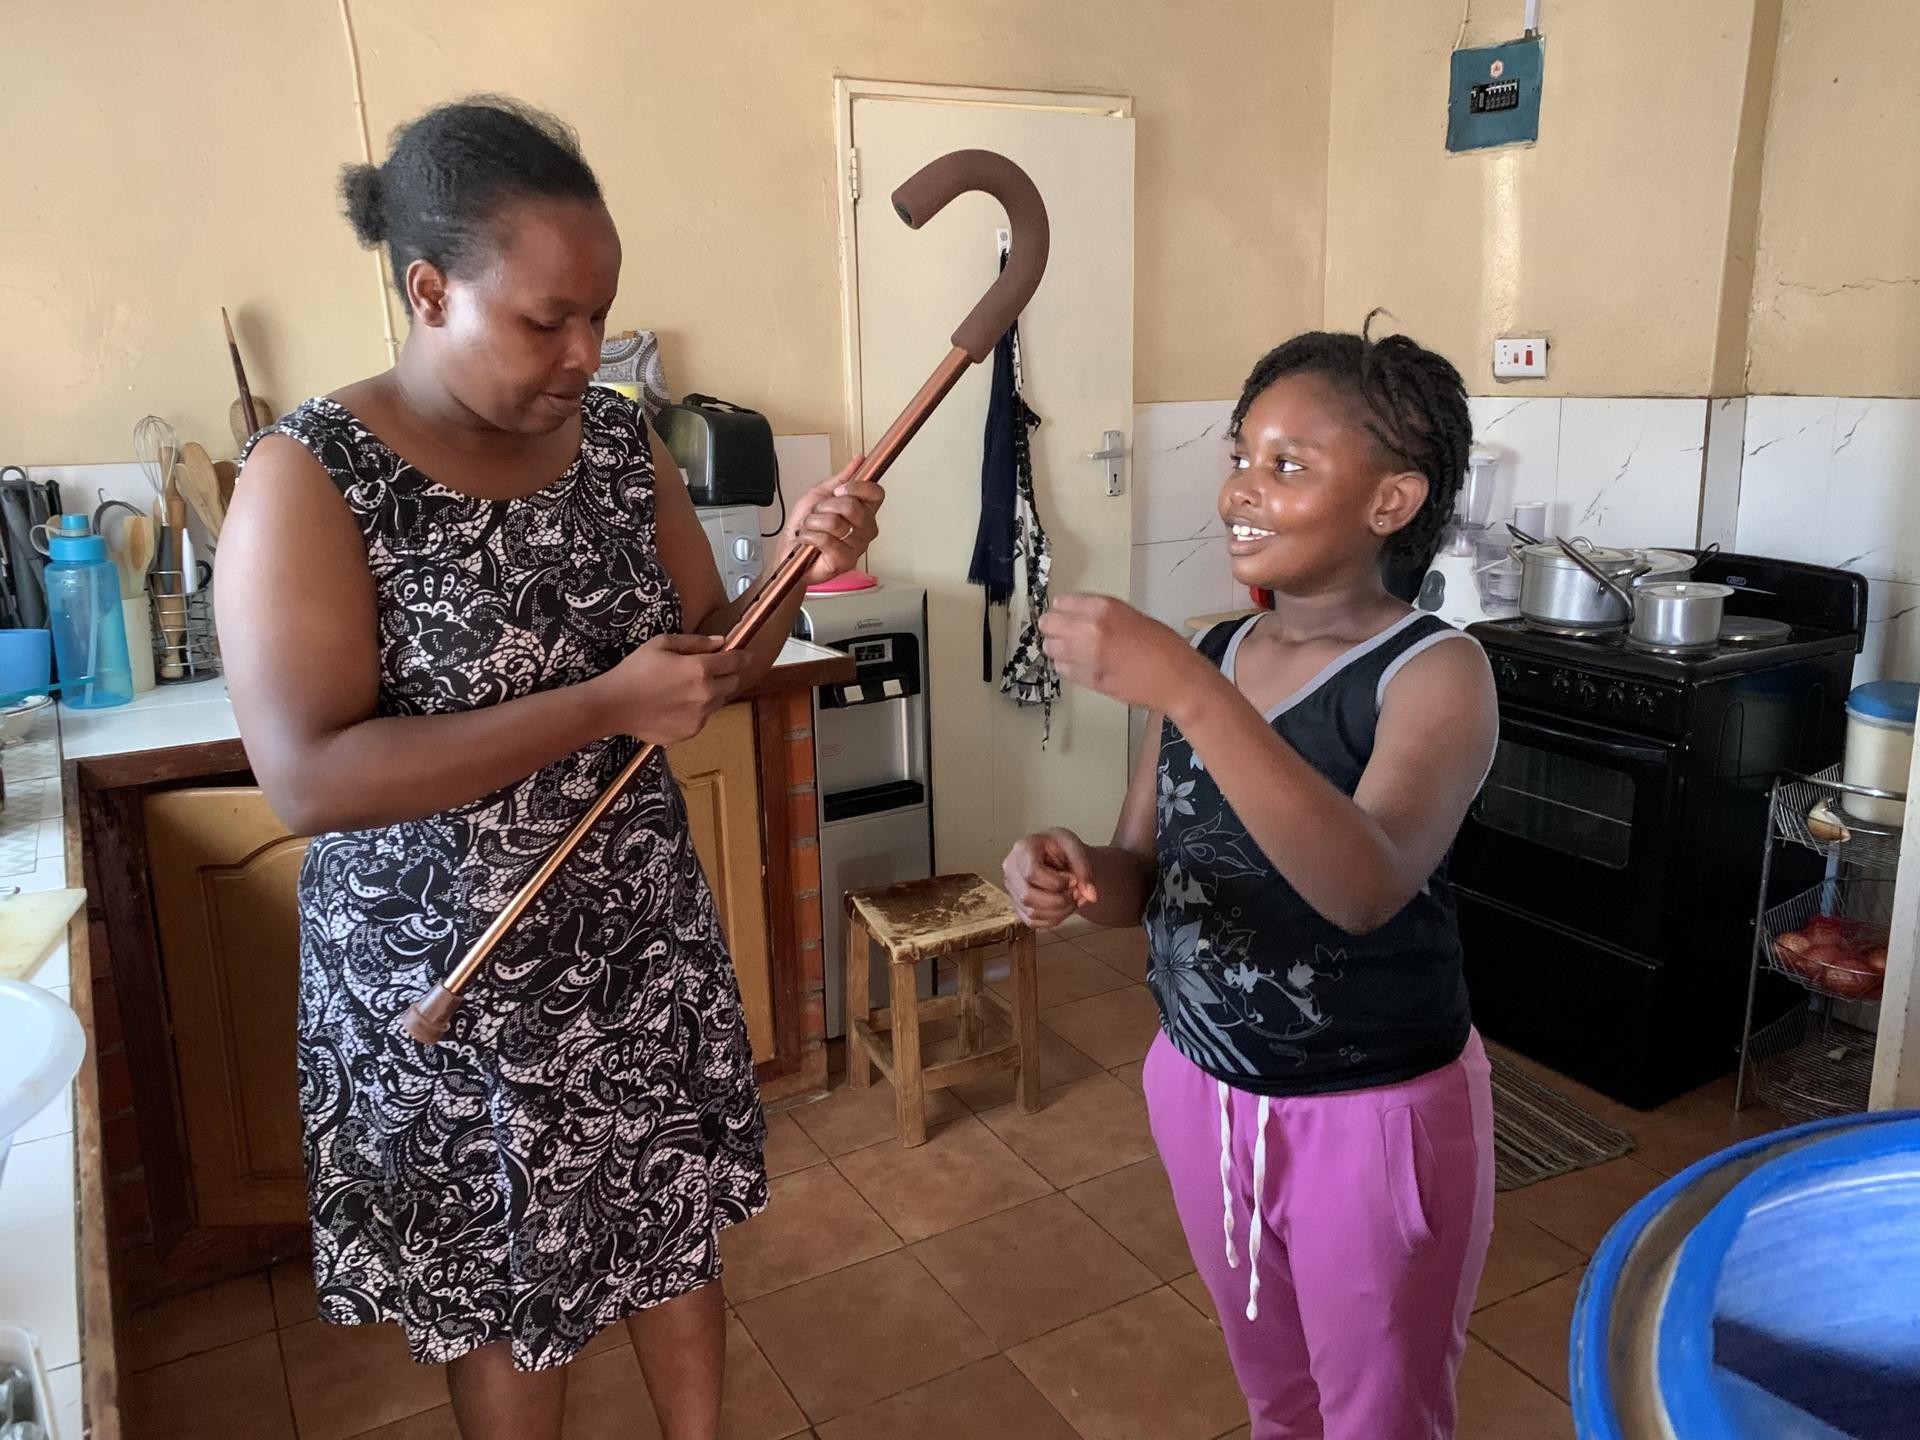 Nala Phiri adjusts the length of her cane while in the kitchen with her daughter Namila. Her leg weakness had progressed to the point where she had to walk using a cane. It has improved since being on treatment for multiple sclerosis.